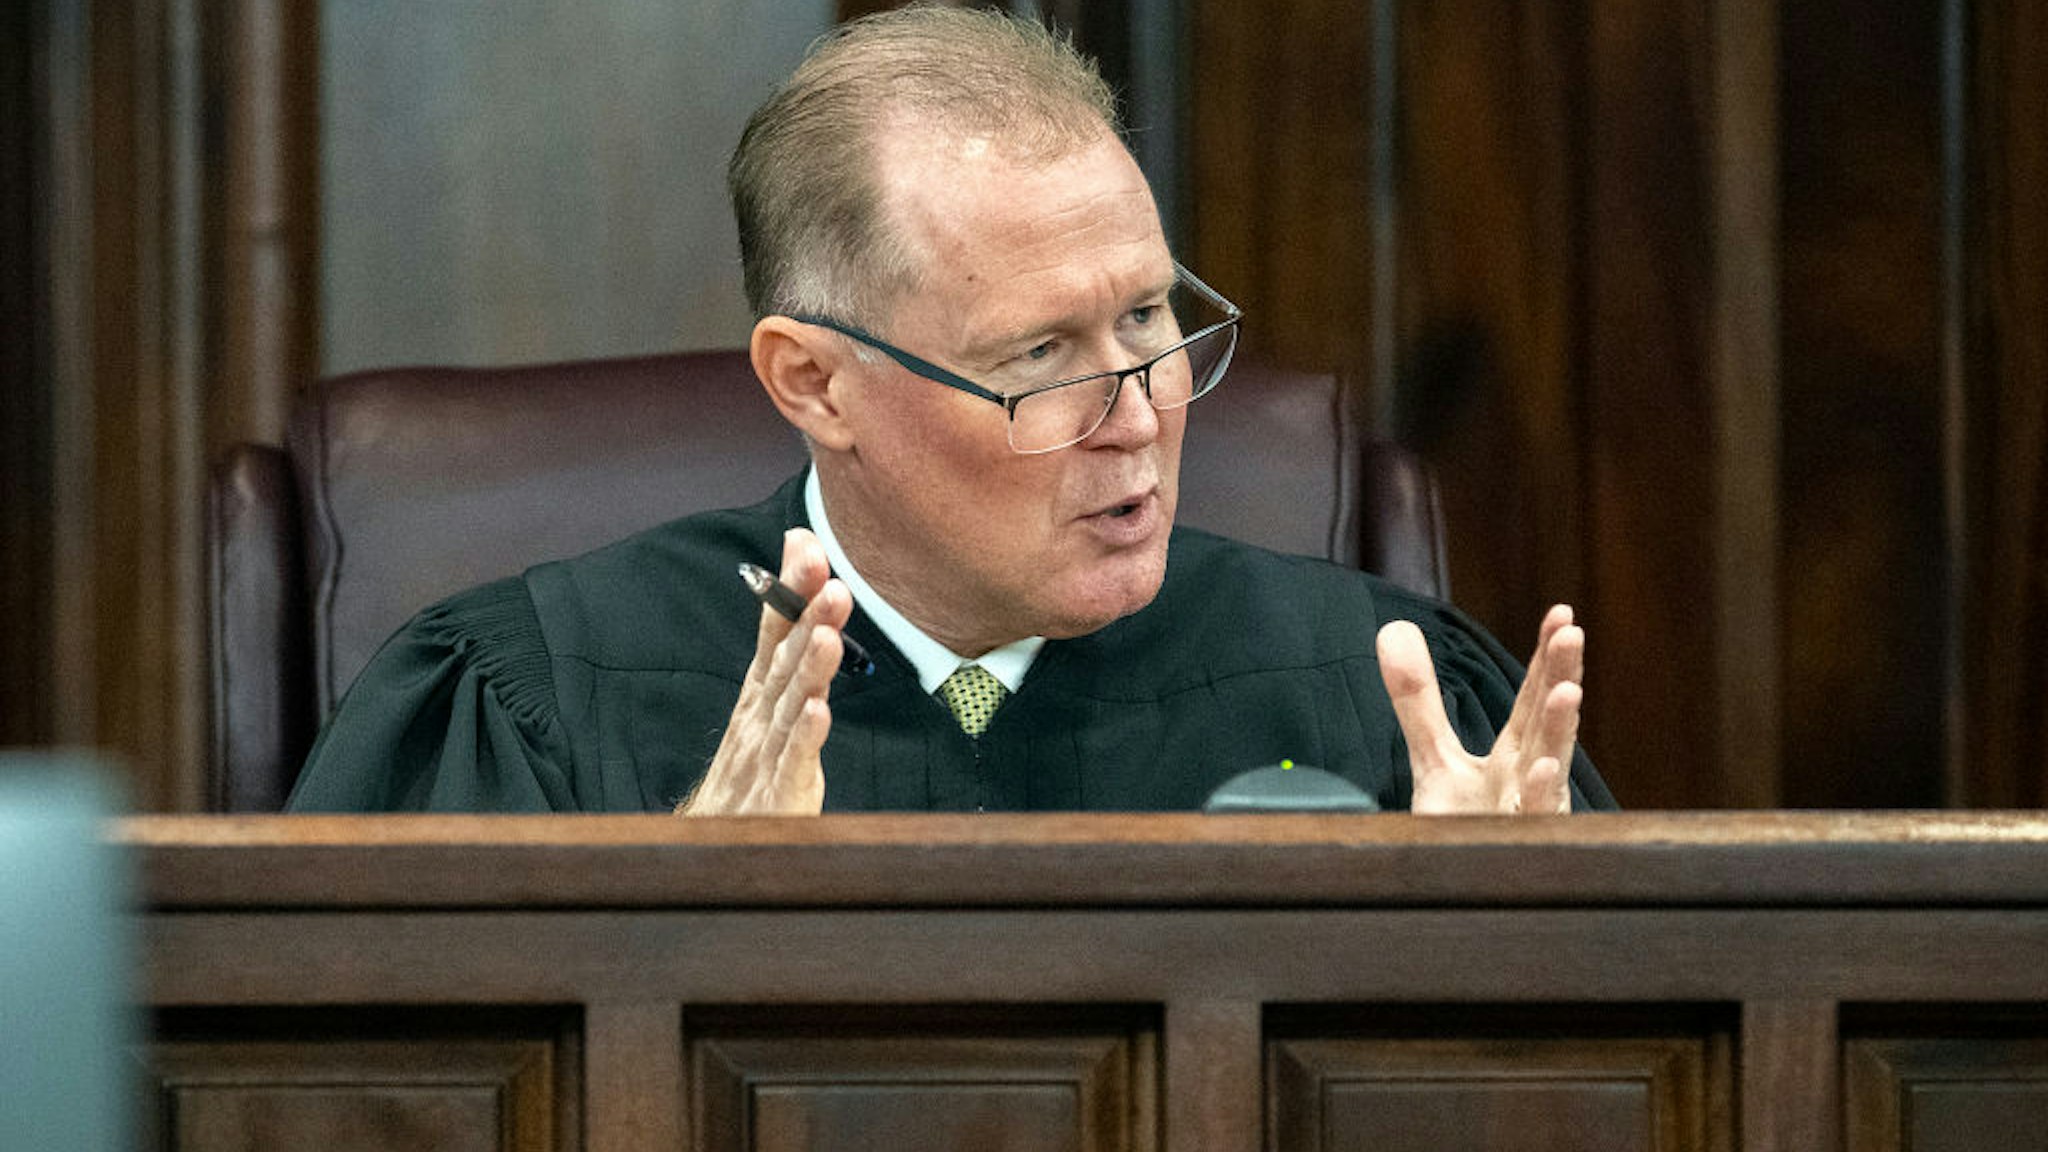 BRUNSWICK, GEORGIA - NOVEMBER 24: Superior Court Judge Timothy Walmsley clarifies a jury request to view a short video clip as part of their deliberation during the trial of McMichel and his son, Travis McMichael, and a neighbor, William "Roddie" Bryan in the Glynn County Courthouse on November 24, 2021 in Brunswick, Georgia. Greg McMichael, his son Travis McMichael, and a neighbor, William "Roddie" Bryan are charged with the February, 2020 fatal shooting of 25-year-old Ahmaud Arbery. (